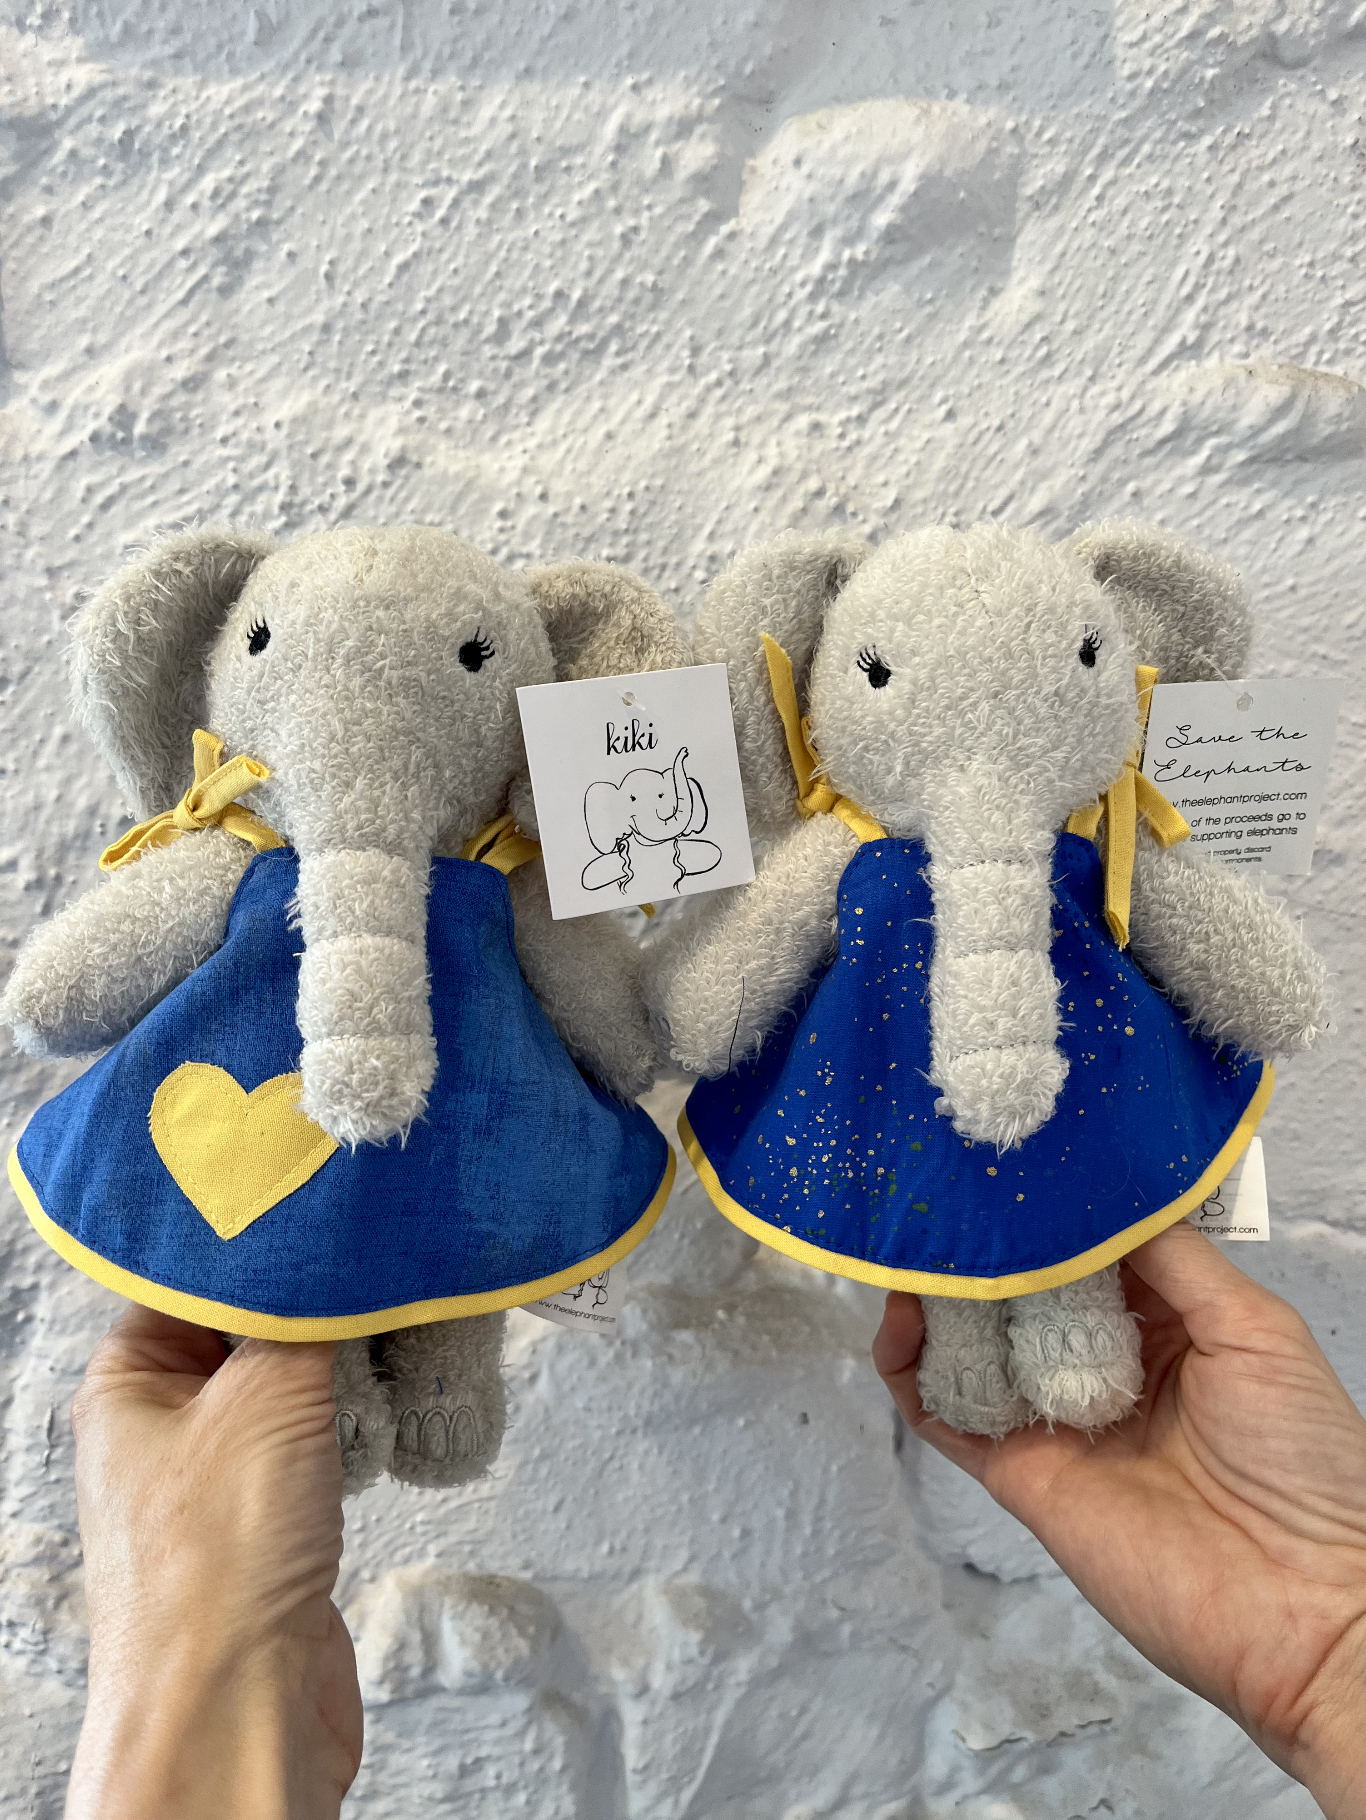 The Elephant Project's 'Ukraine Kiki' Exchanges White for Ukrainian Blue  and Yellow — The Elephant Project